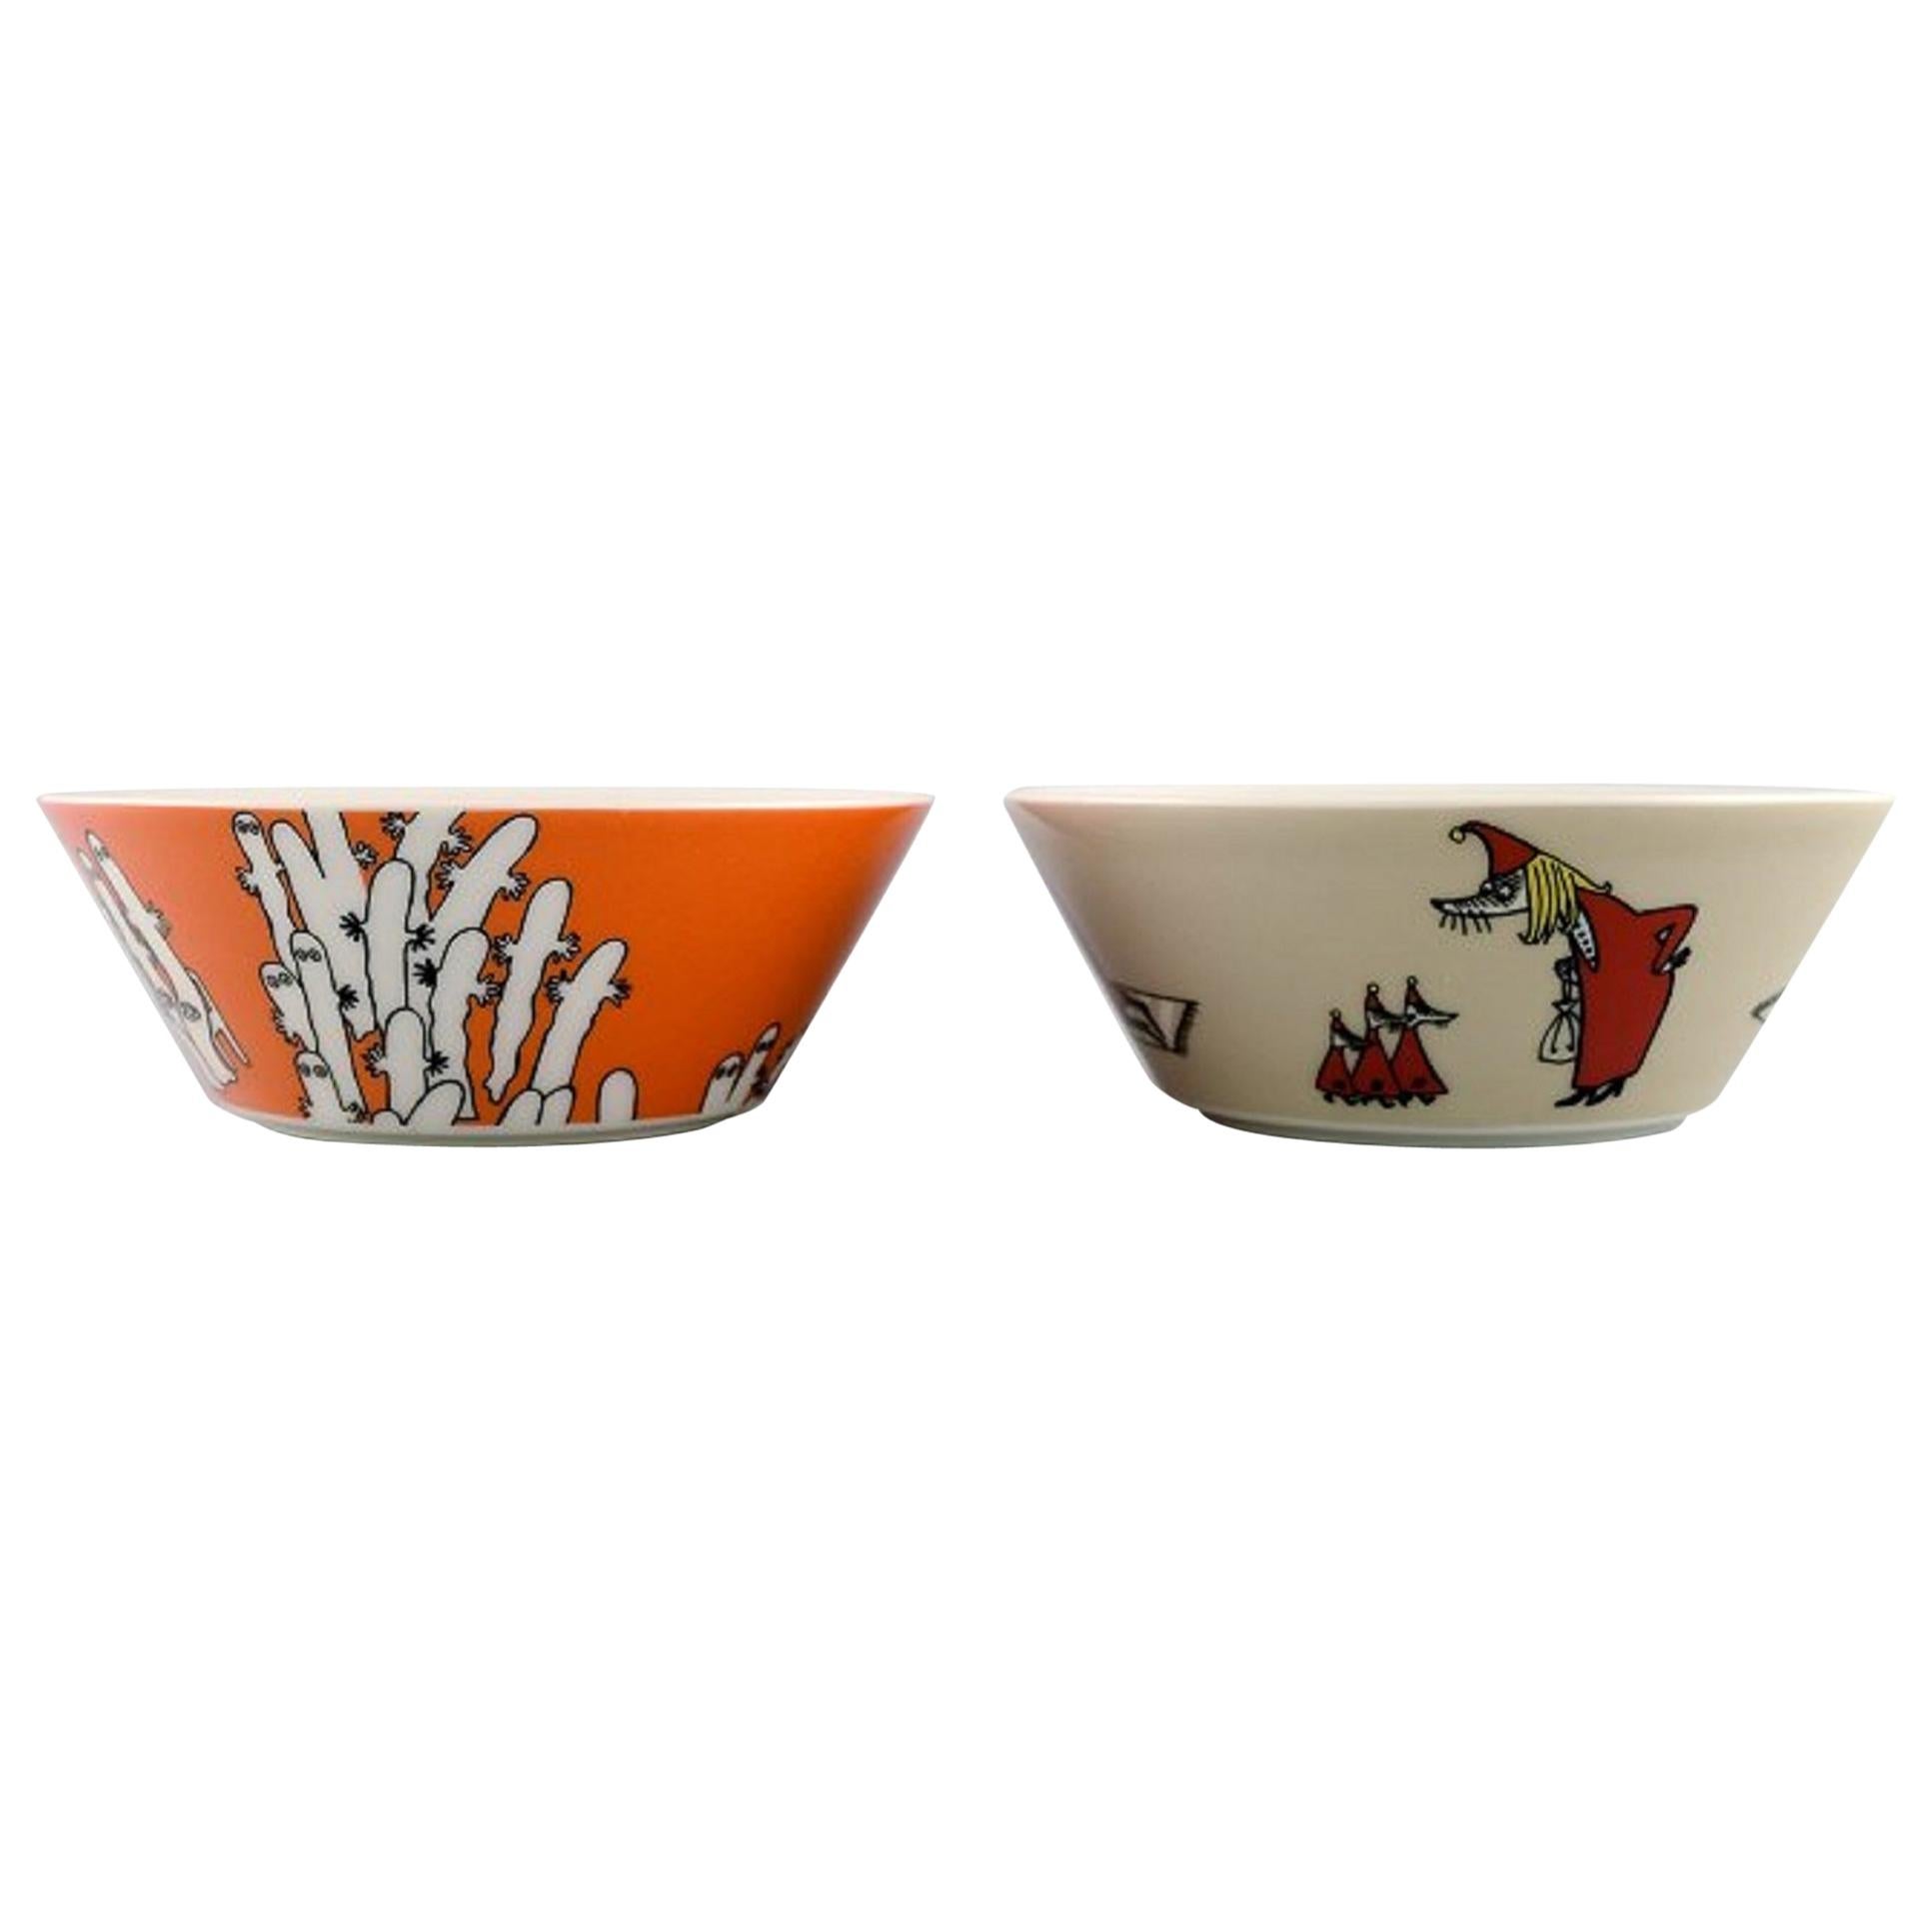 Arabia, Finland, Two Porcelain Bowls with Motifs from "Moomin" Late 20th Century